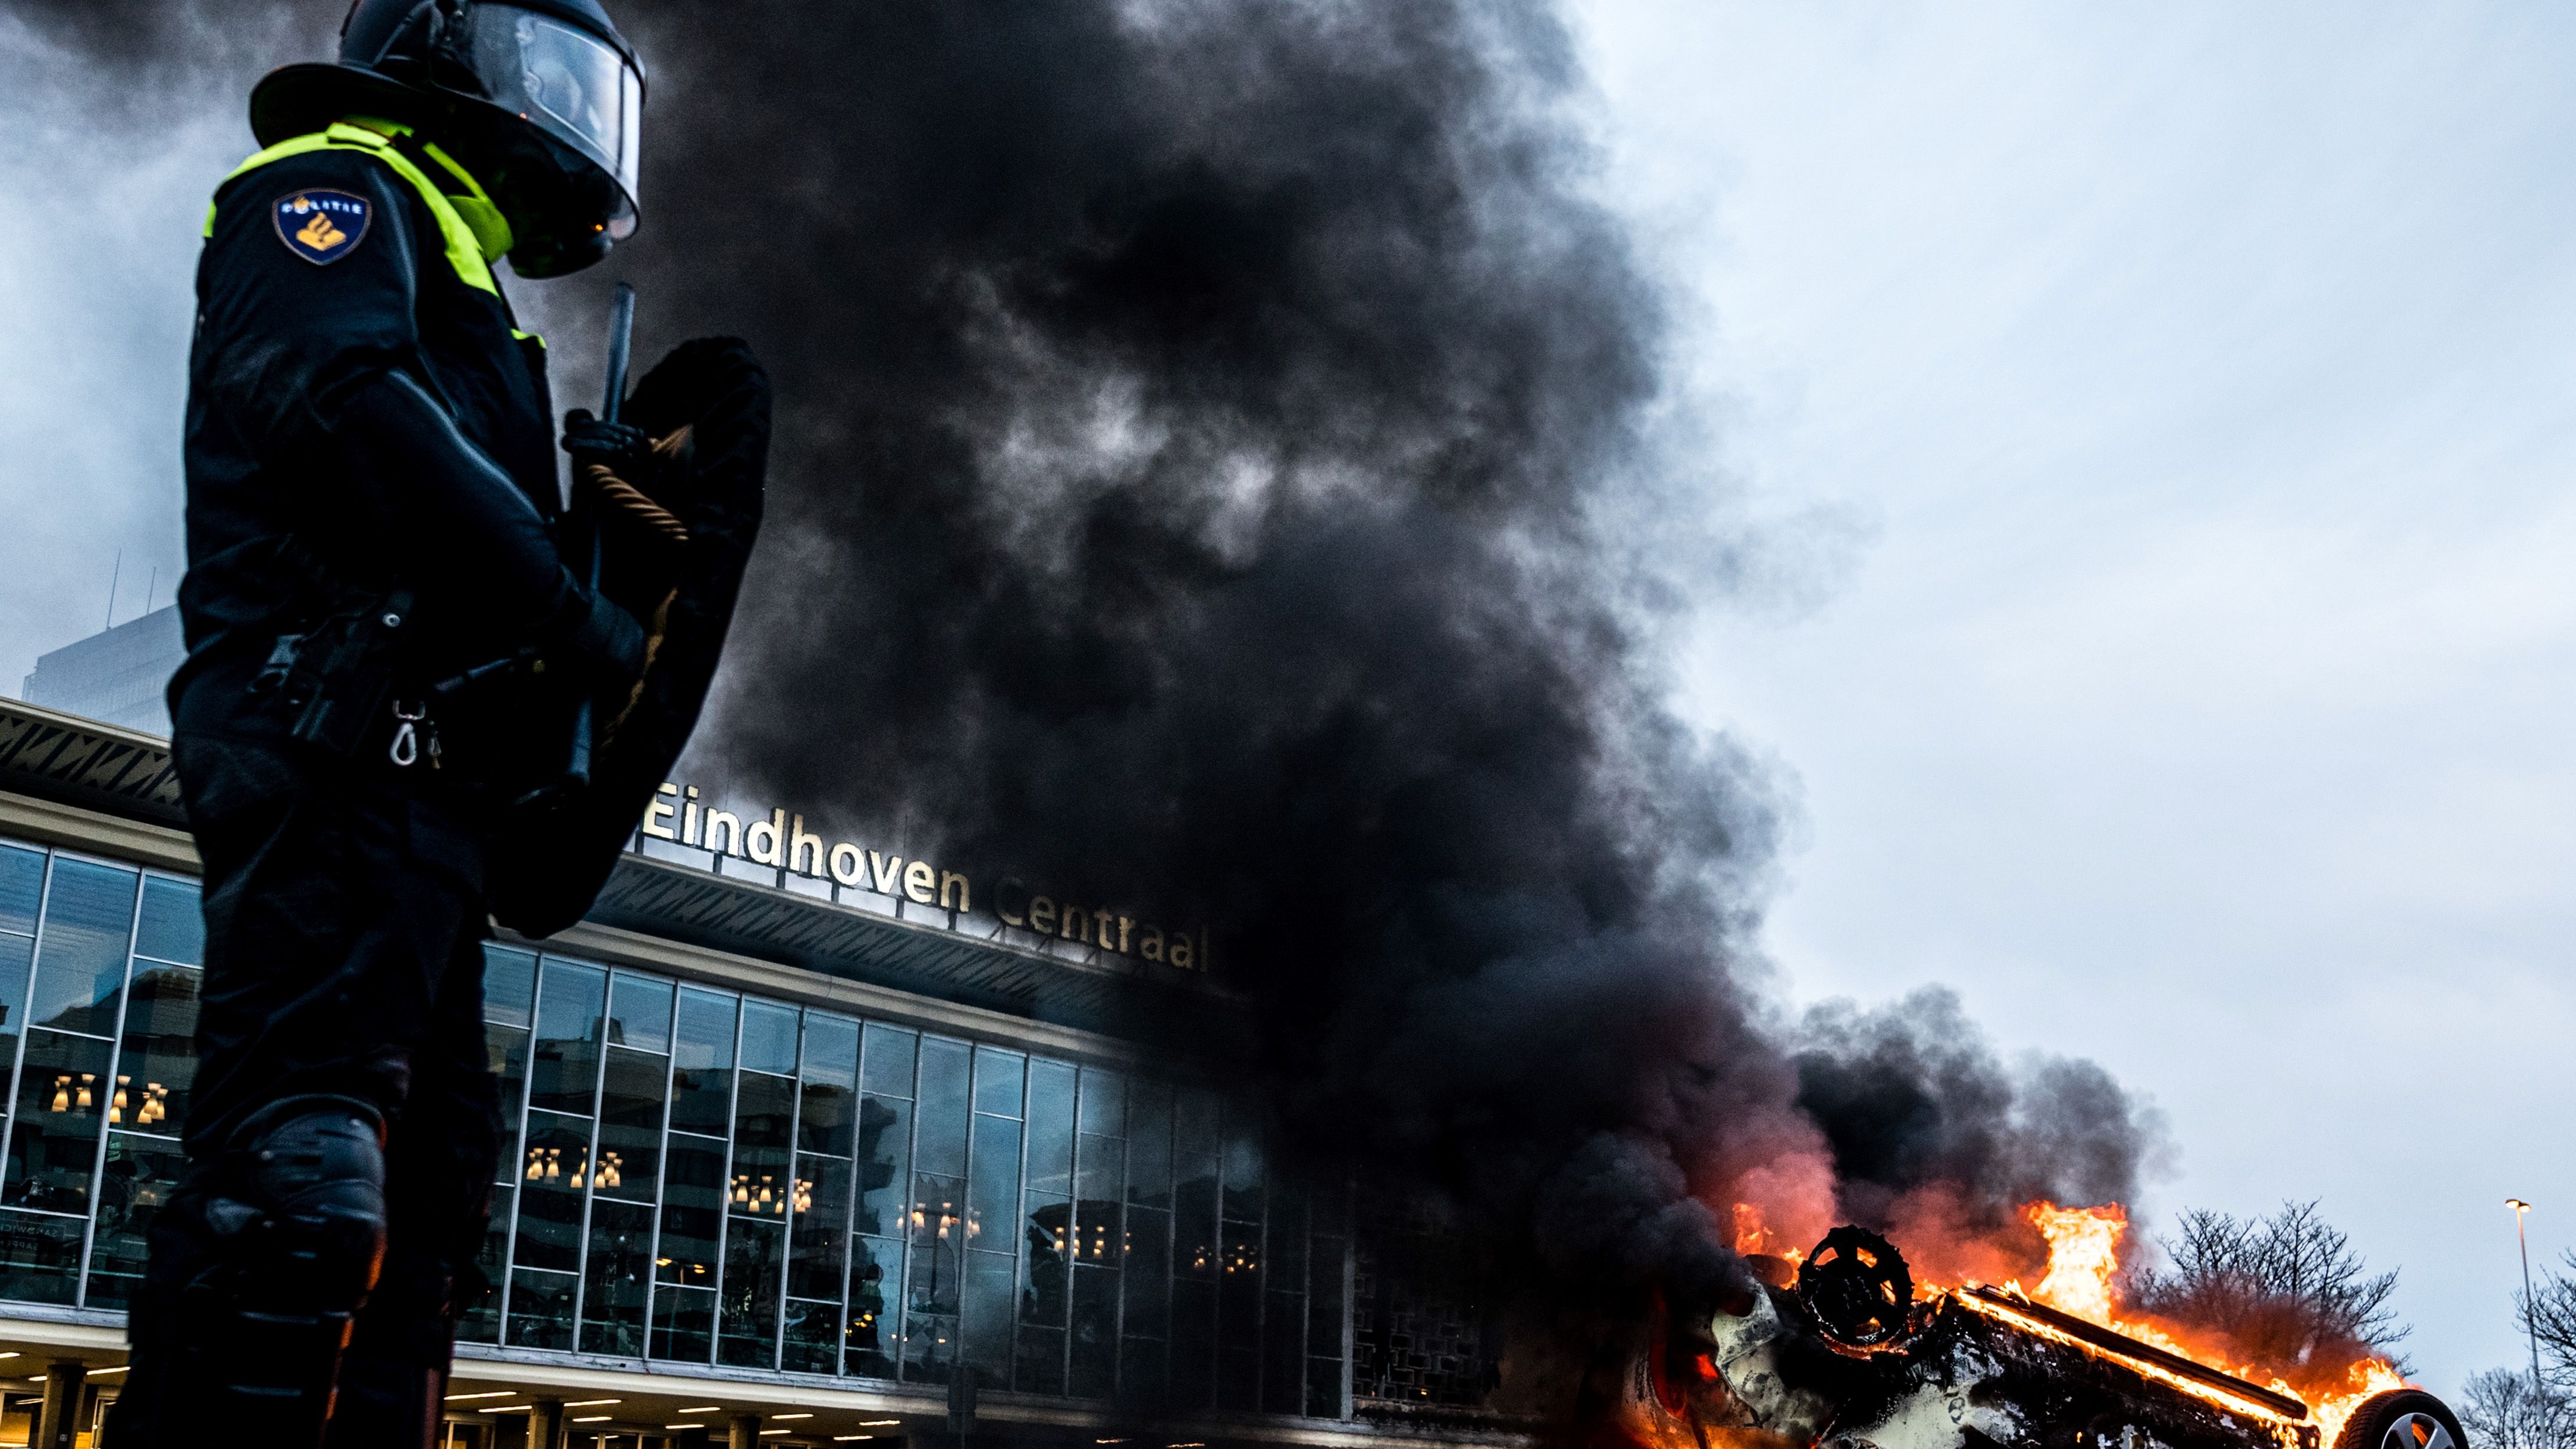 A car burns during anti-lockdown protests in Eindhoven in January